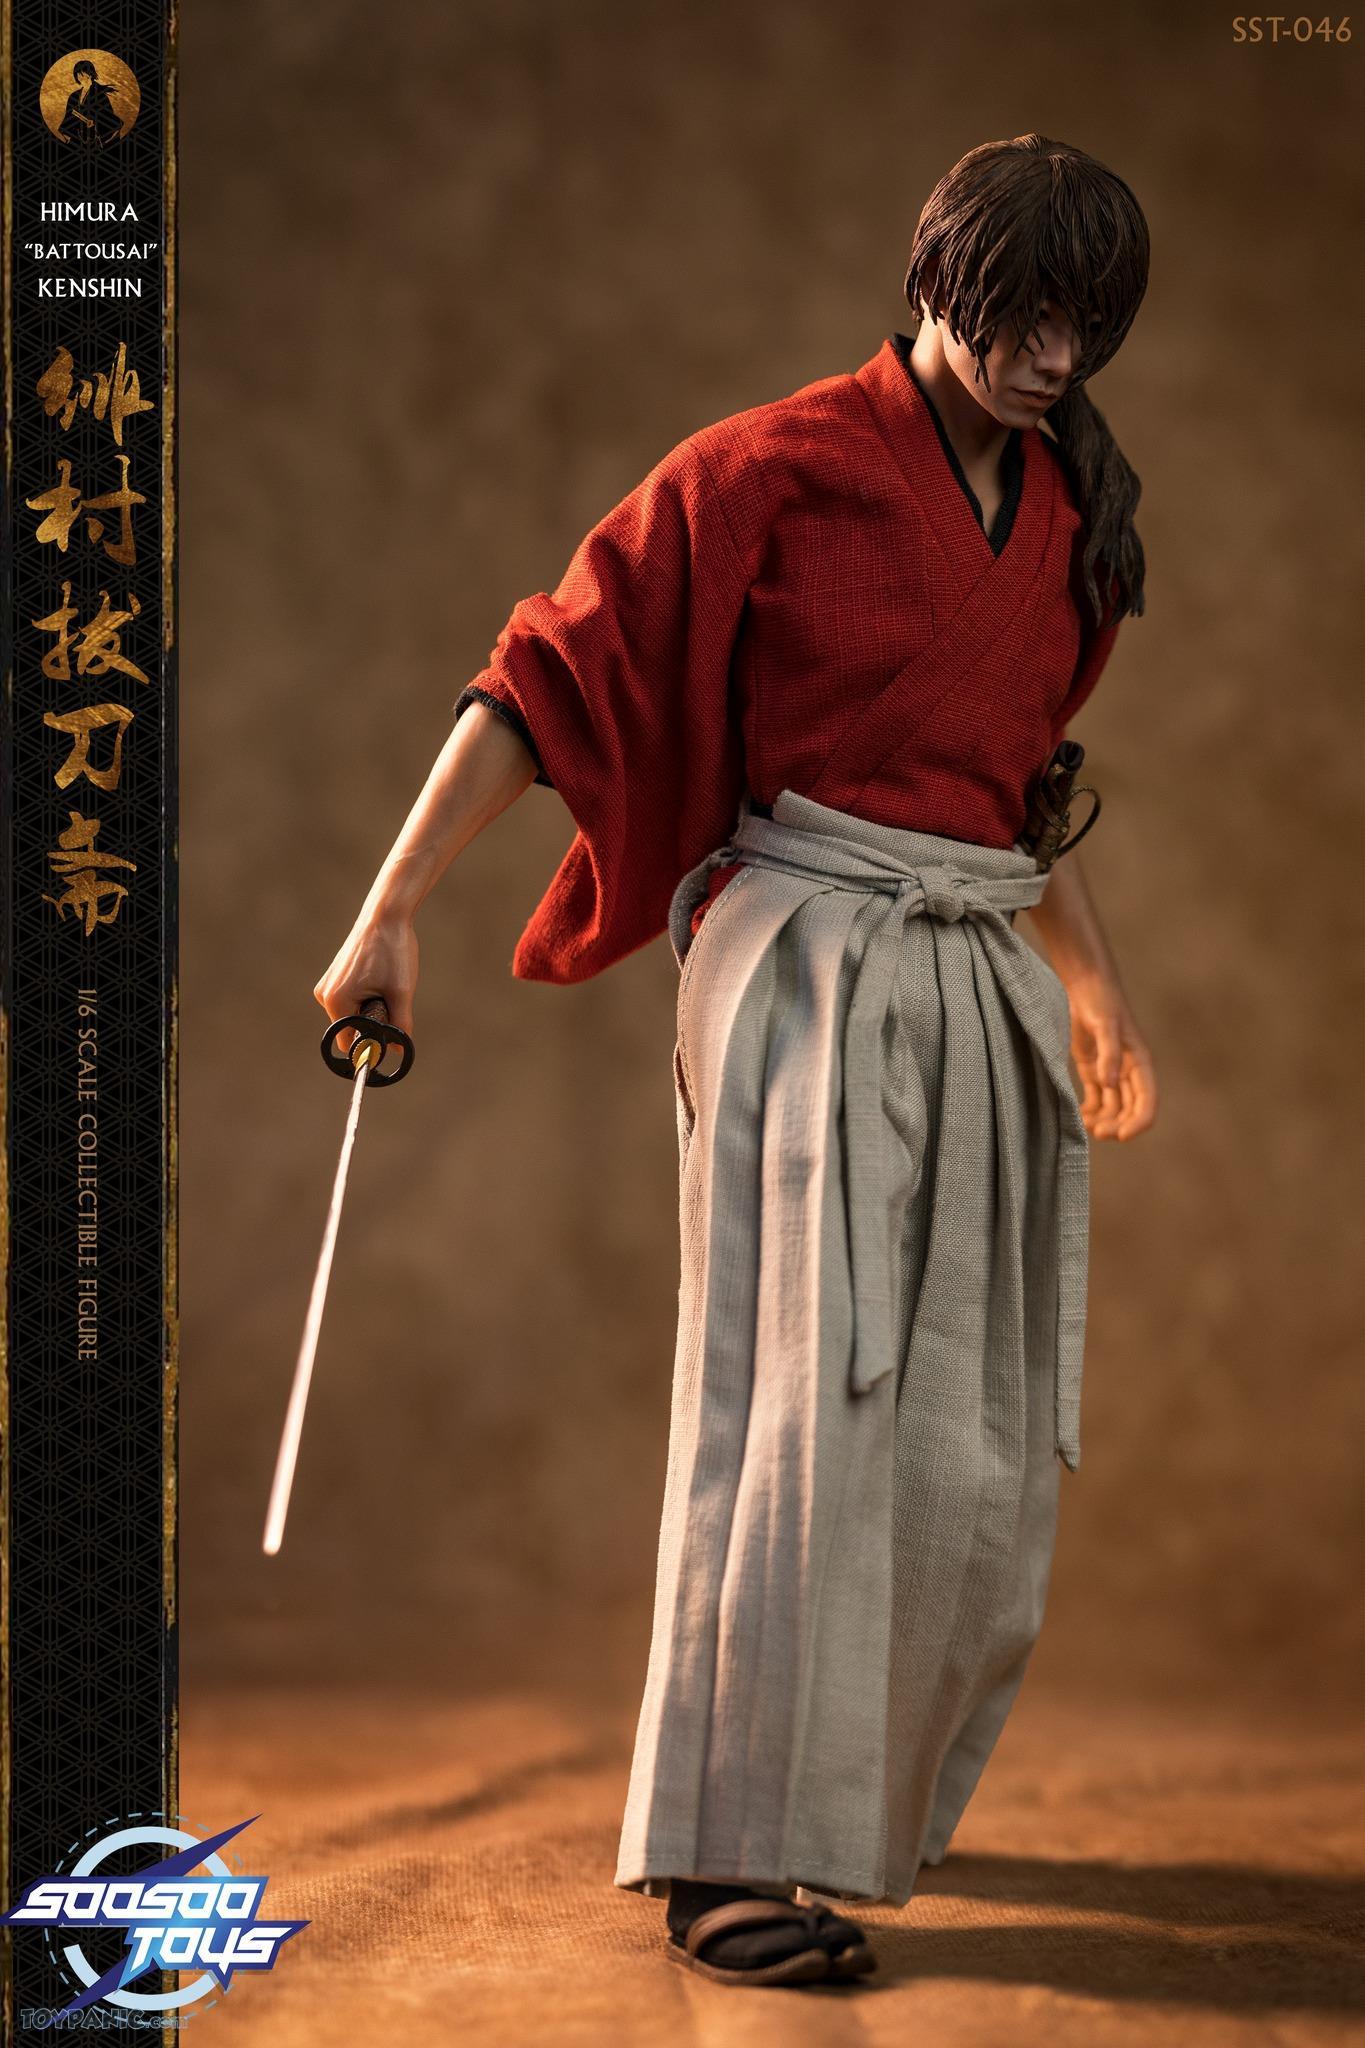 himura - NEW PRODUCT: 1/6 scale Rurouni Kenshin Collectible Figure from SooSooToys 712202251231PM_223060